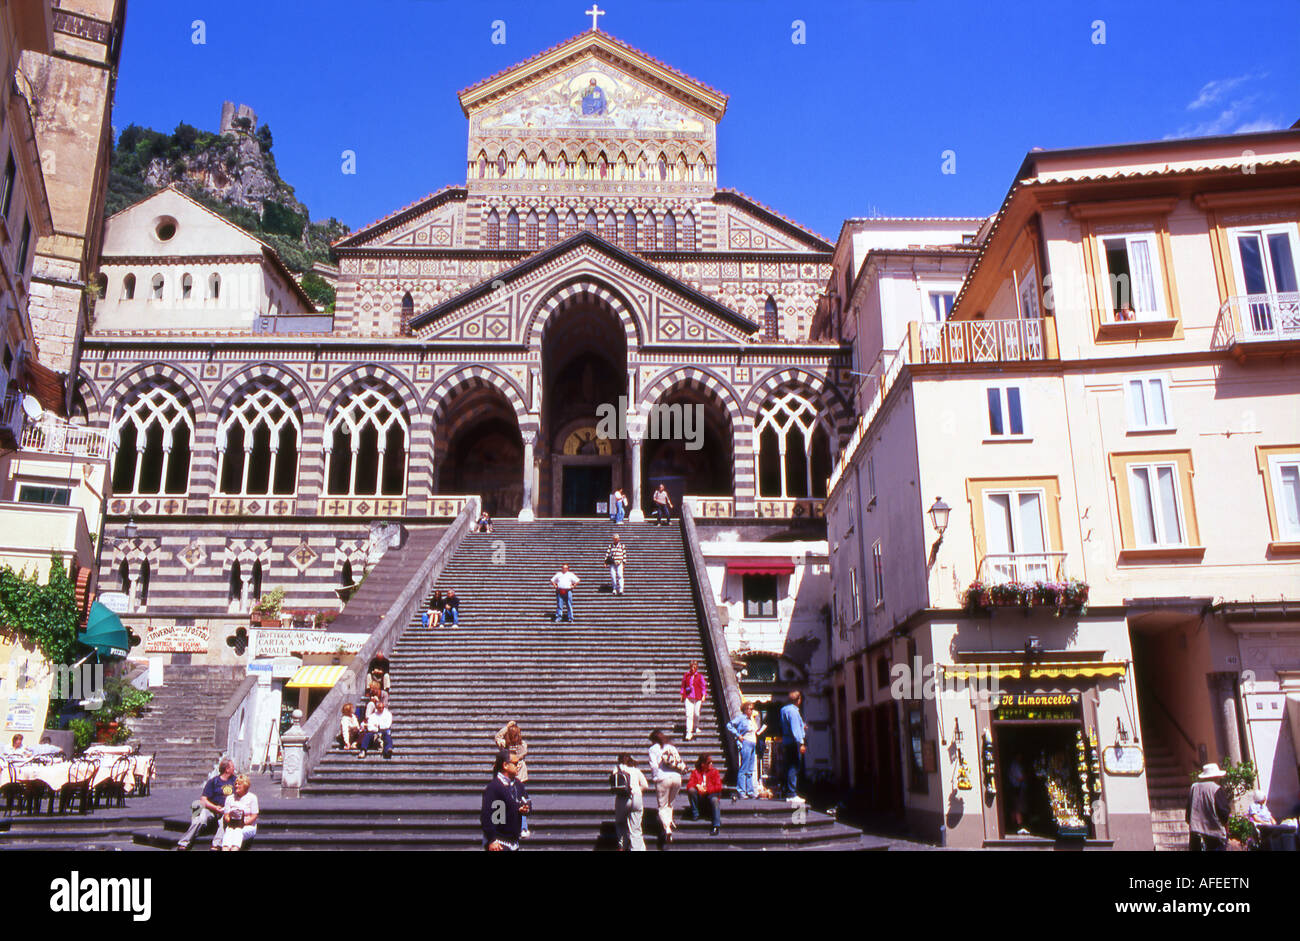 Cattedrale di Sant'Andrea is a medieval Roman Catholic cathedral in the Piazza del Duomo, Amalfi, Italy Stock Photo